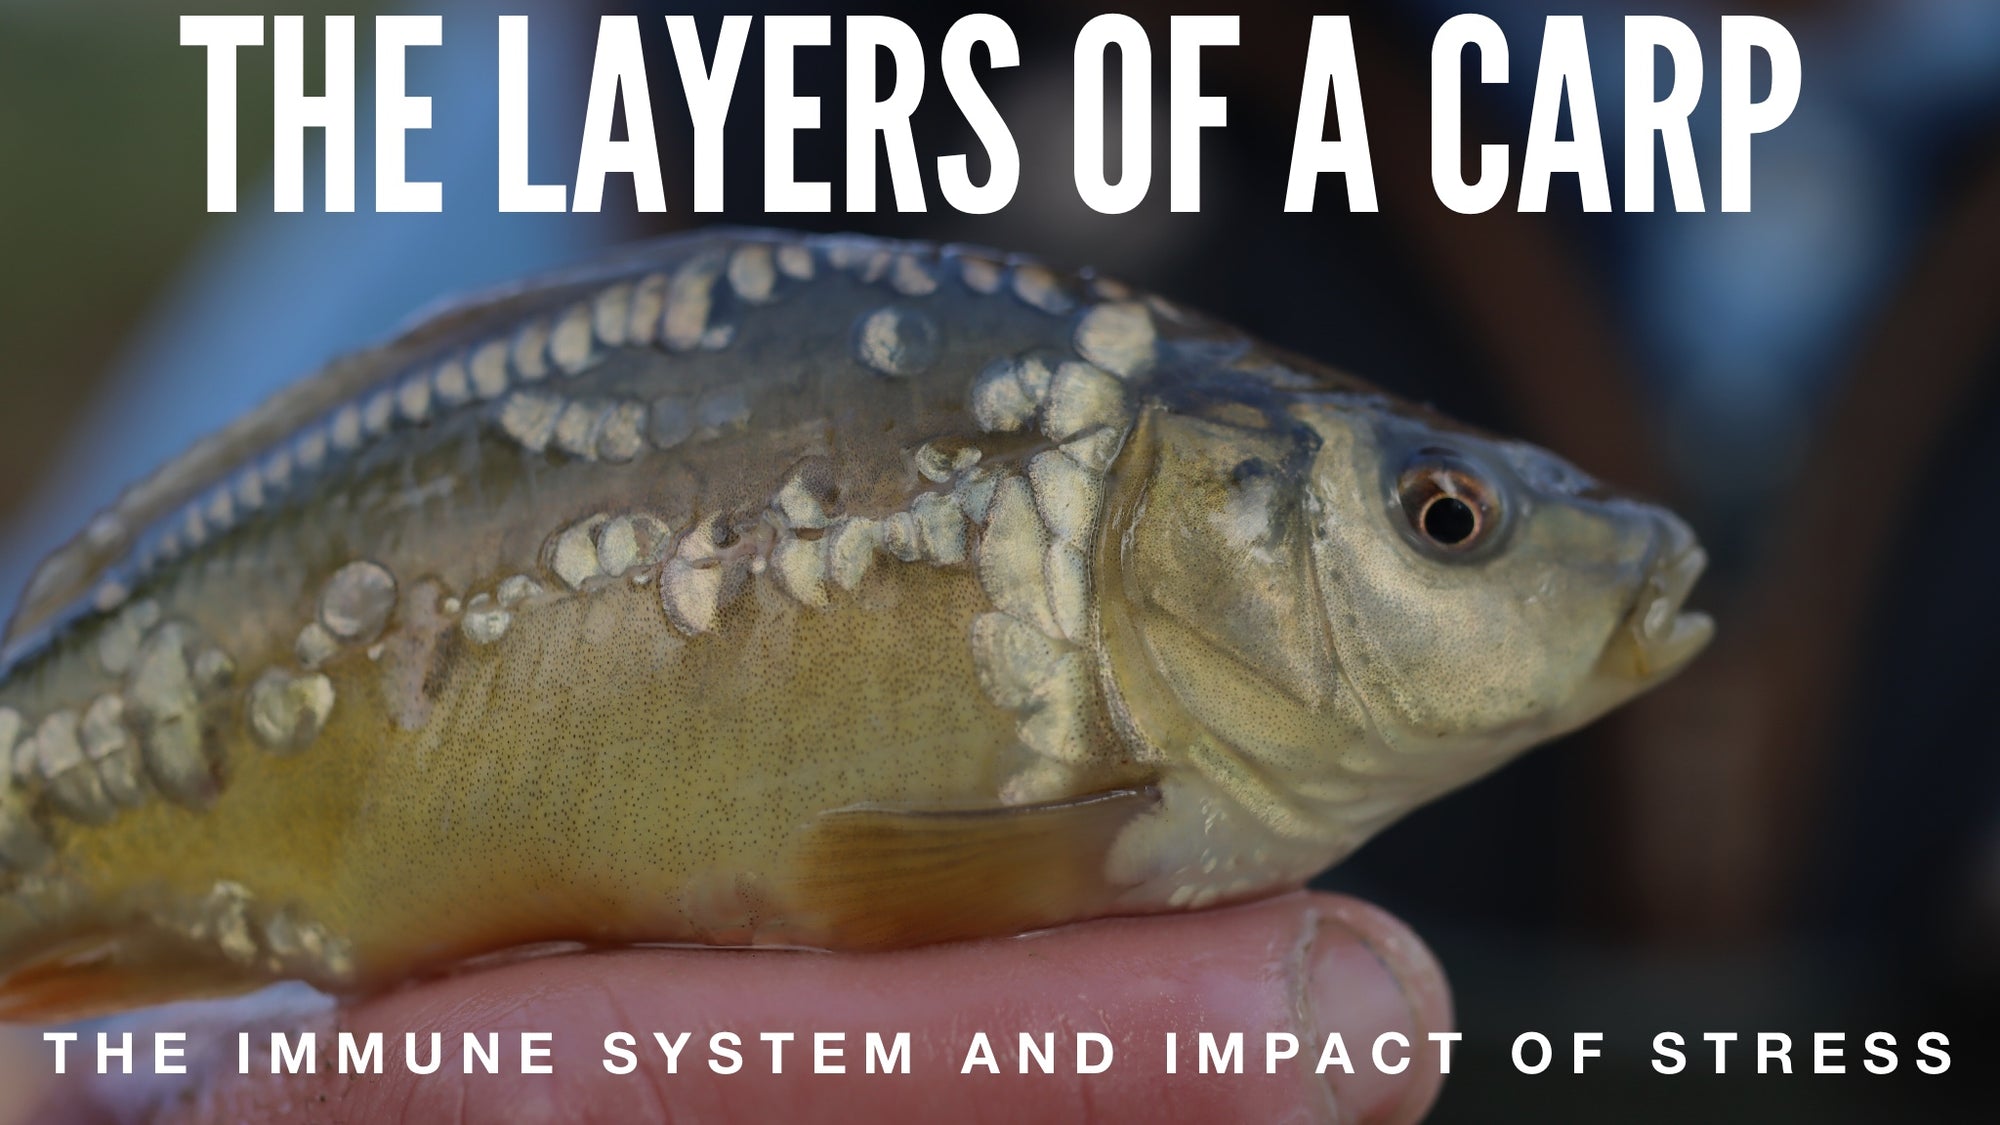 The layers of a Carp, the immune system and impact of stress.